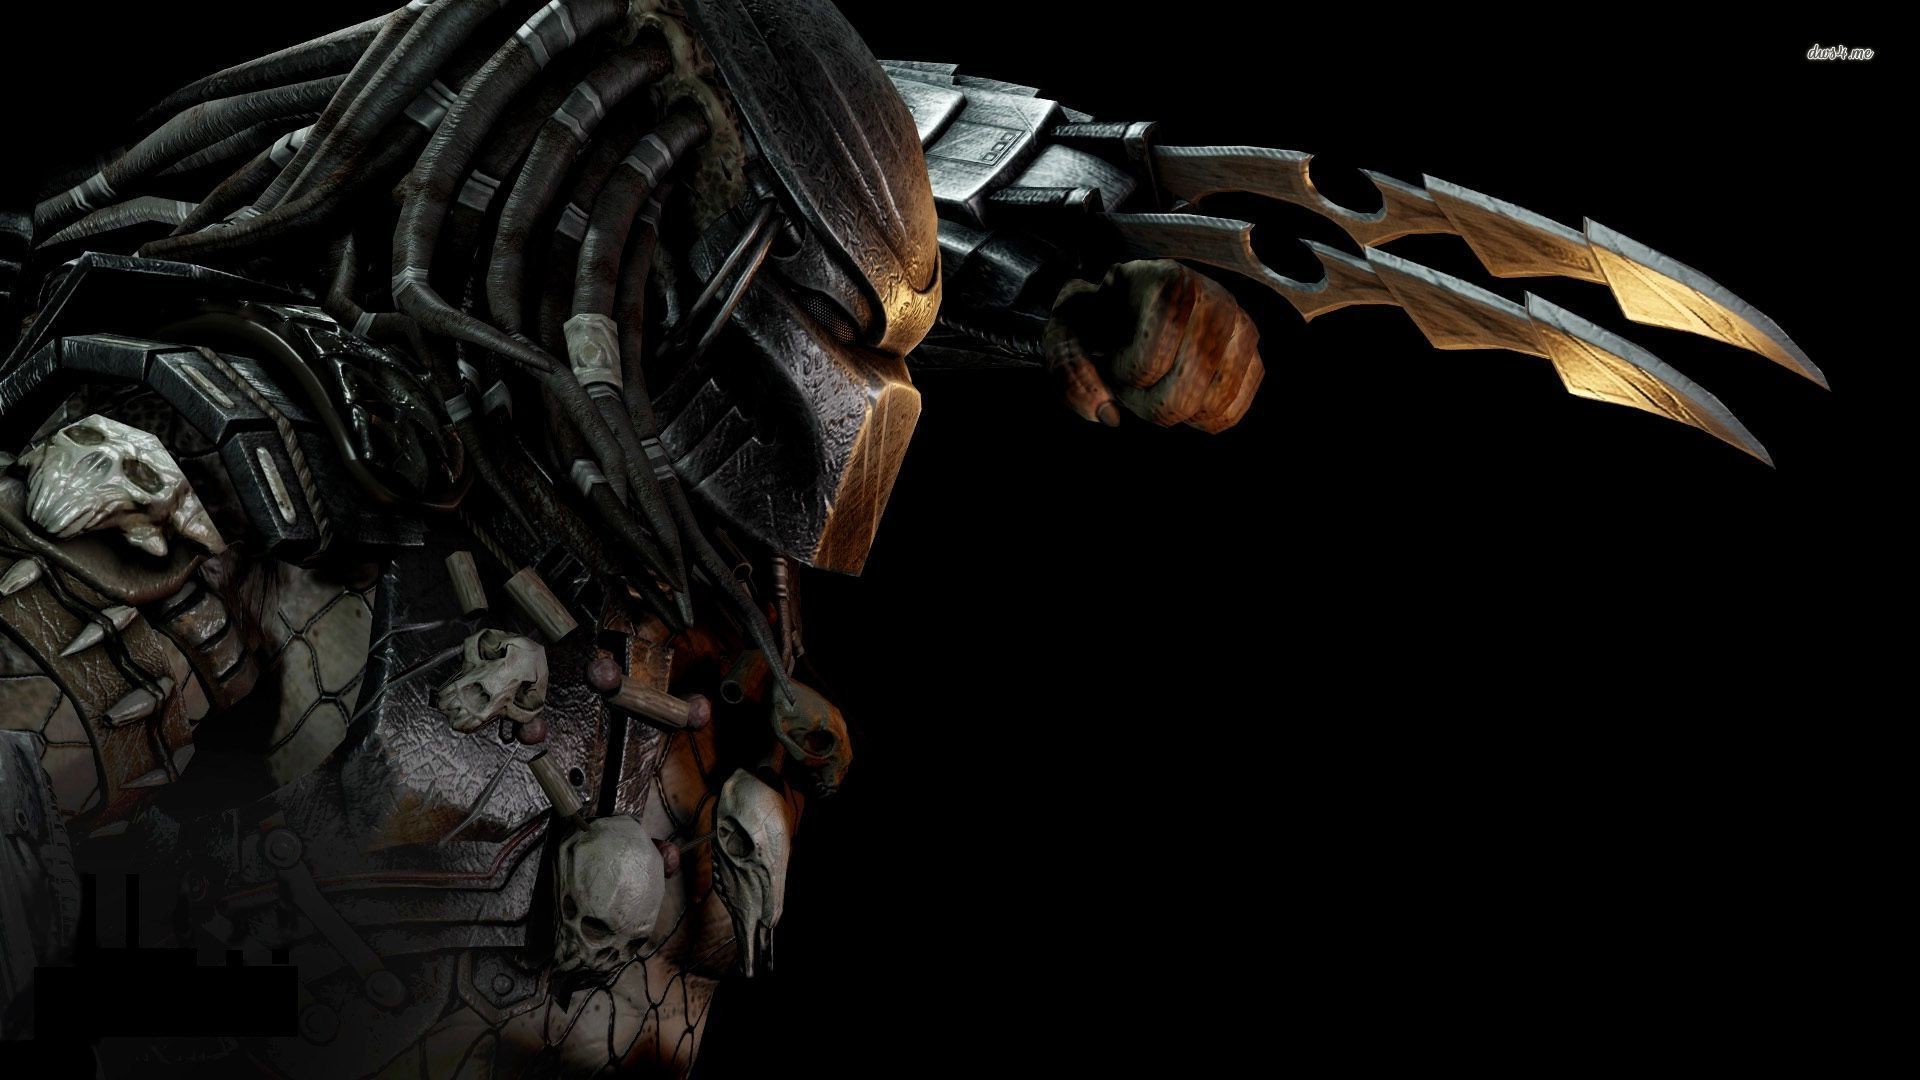 1920x1080 0  predator wallpaper hd pack Download Awesome collection of   predator wallpaper6.j